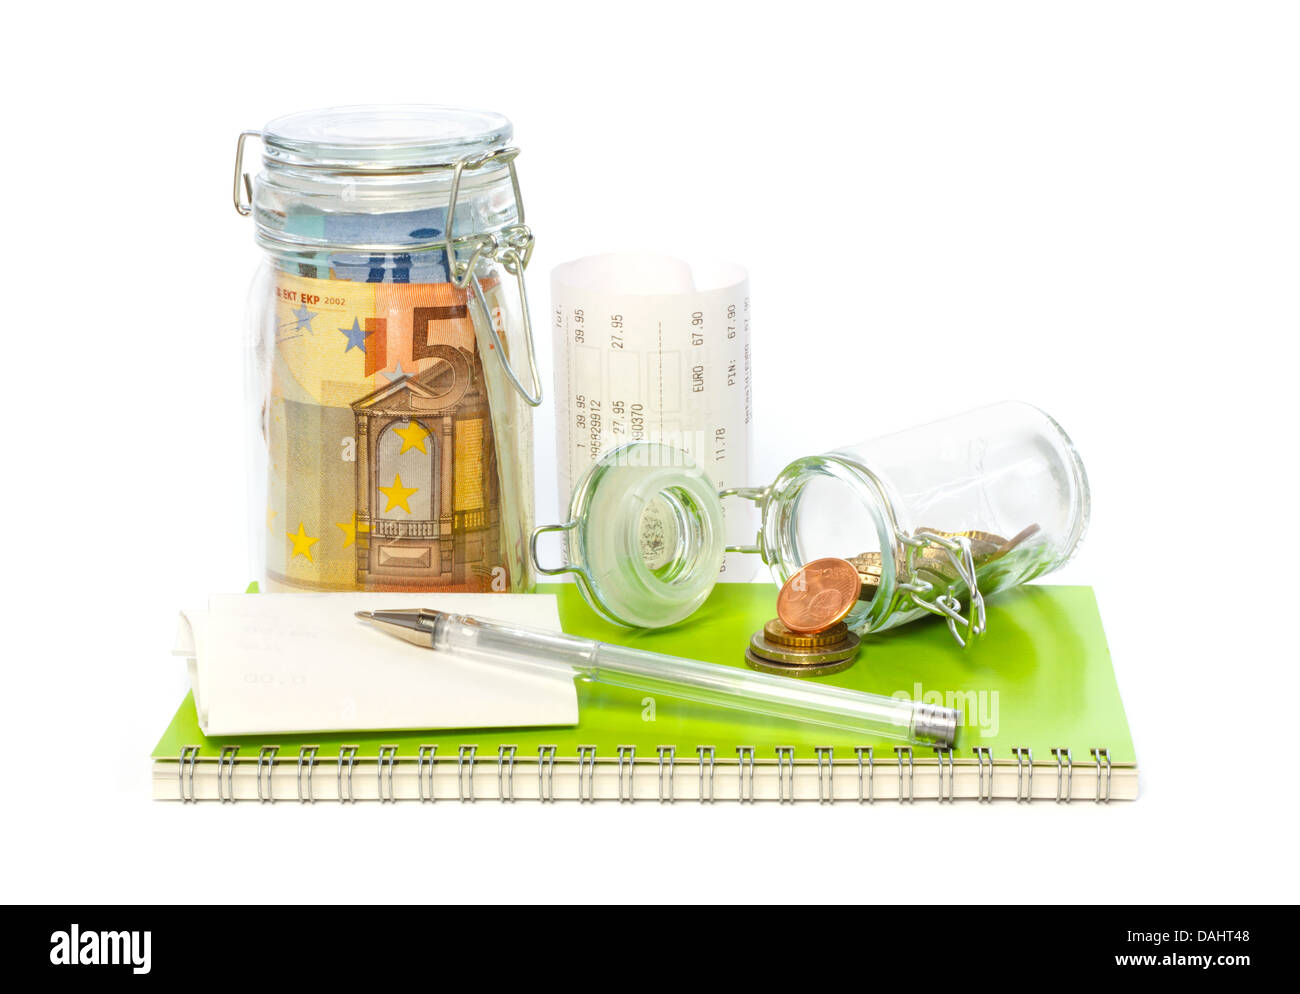 Euro savings on the expenditure book with cash register receipts and pen Stock Photo